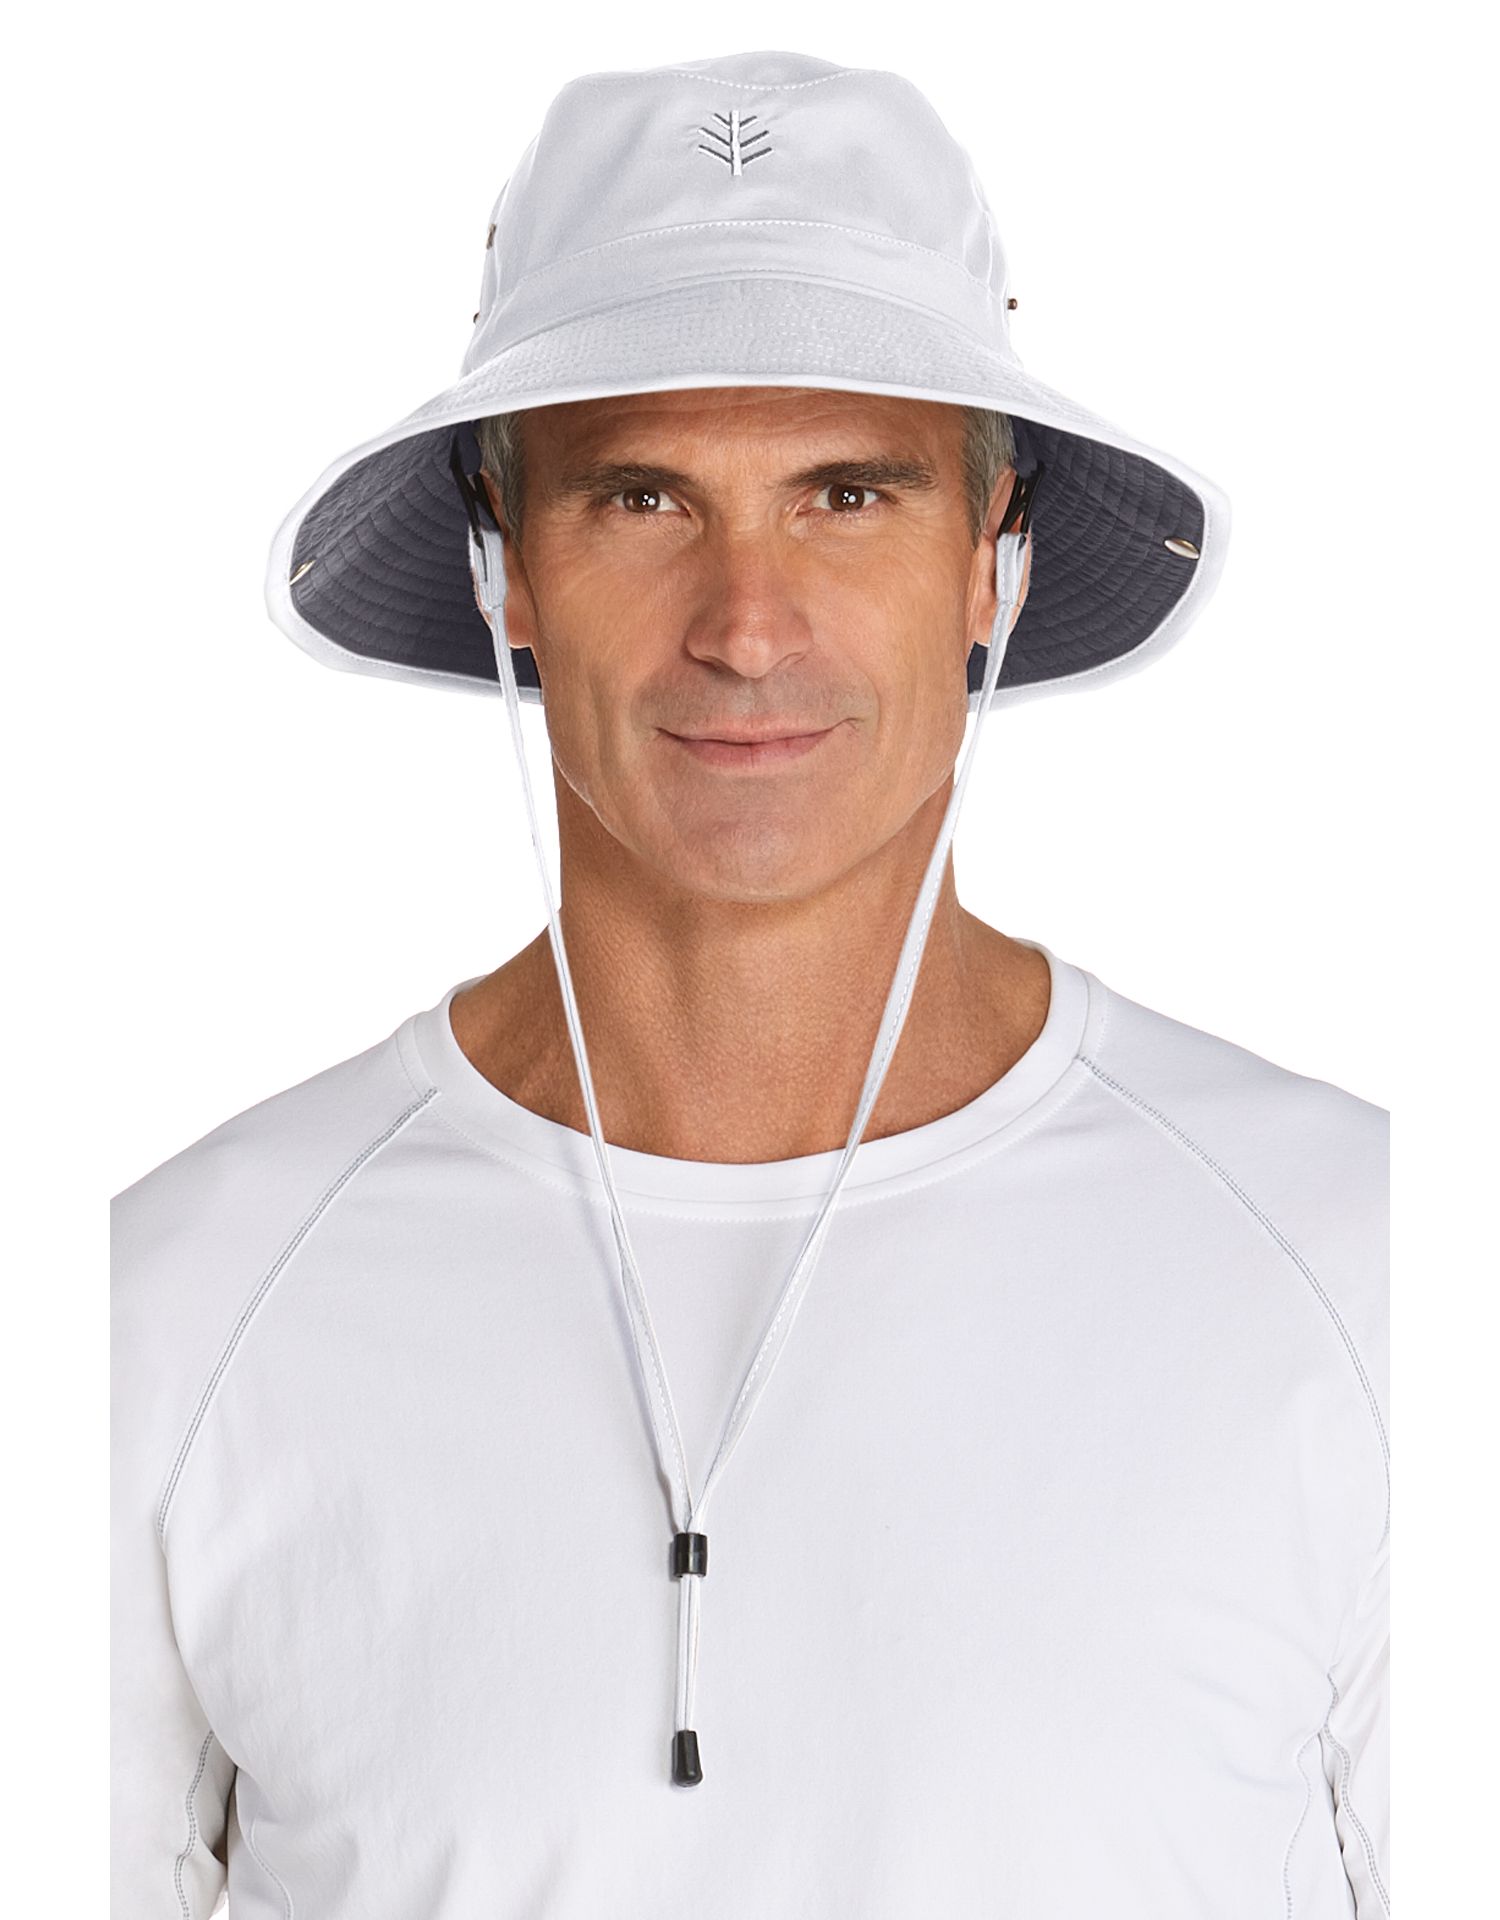 Coolibar - Featherweight UV Bucket Hat for men - Chase - White/Carbon